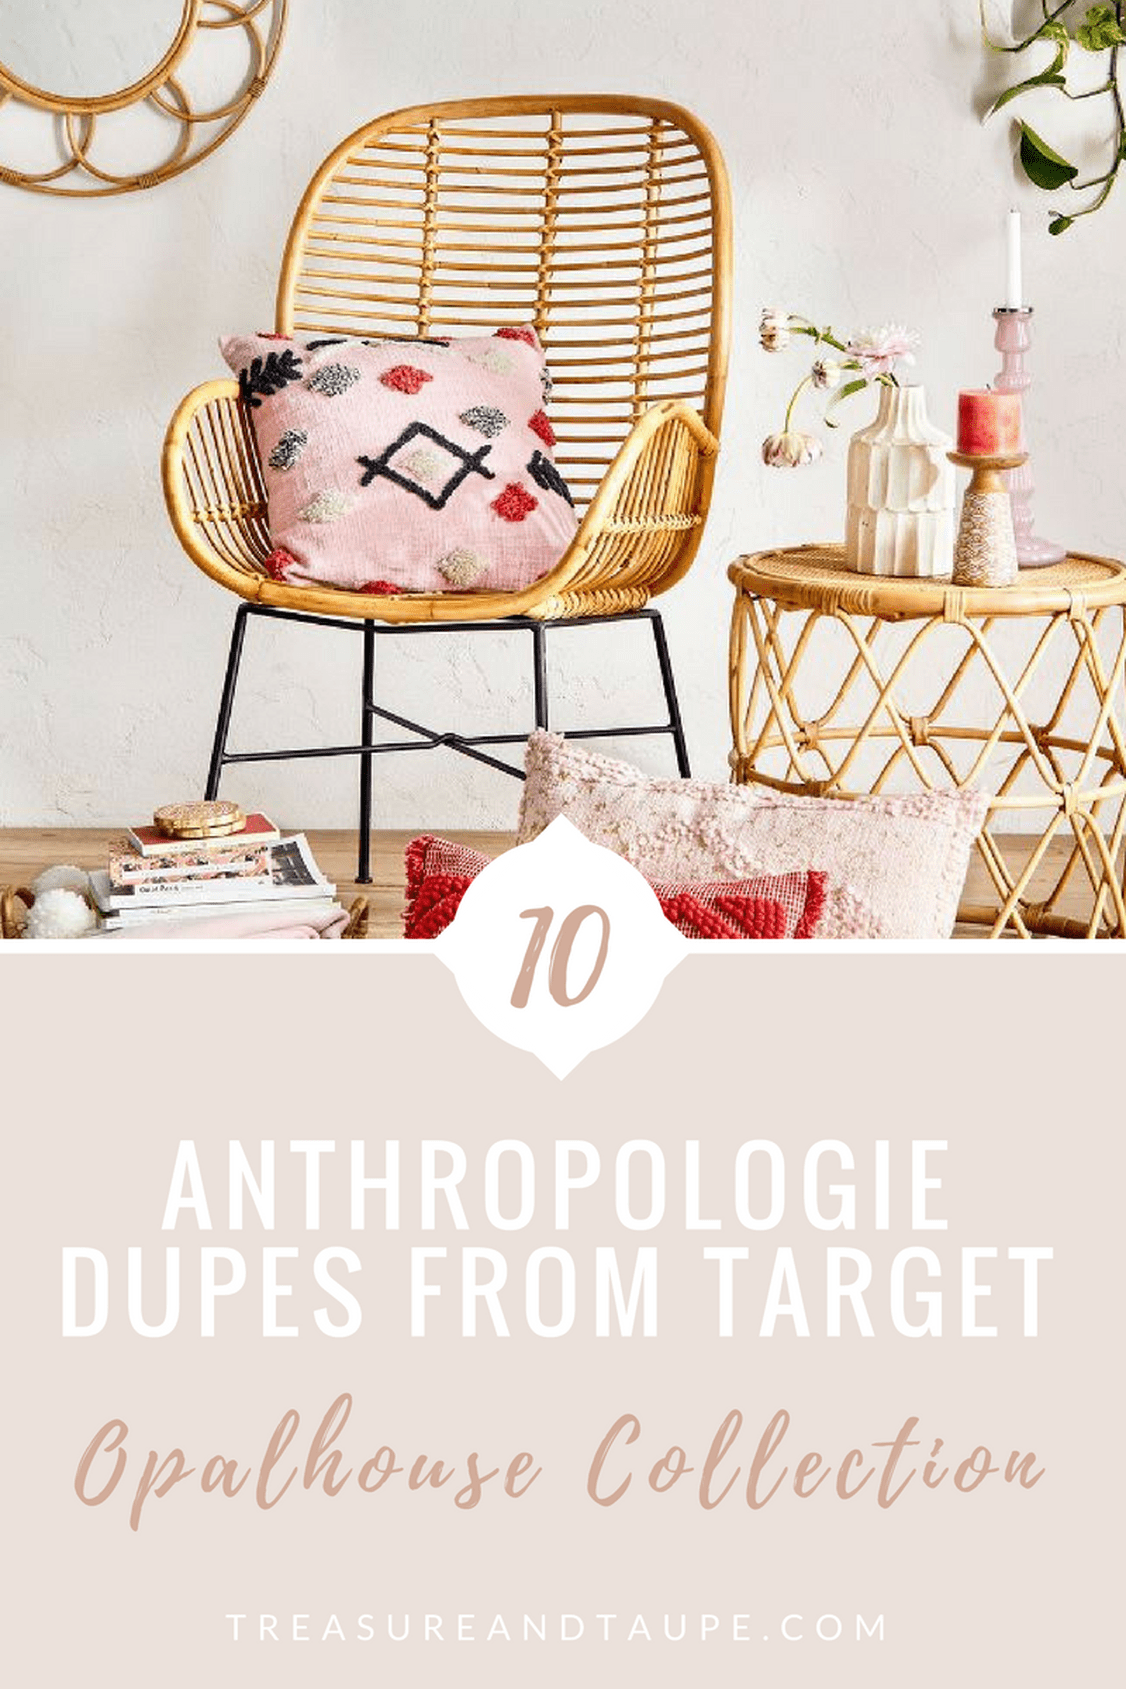 anthropologie dupes from target opalhouse collection treasure style sneakers side table home decor save splurge garden umbrella outdoor prep antique end tables with leather inlay